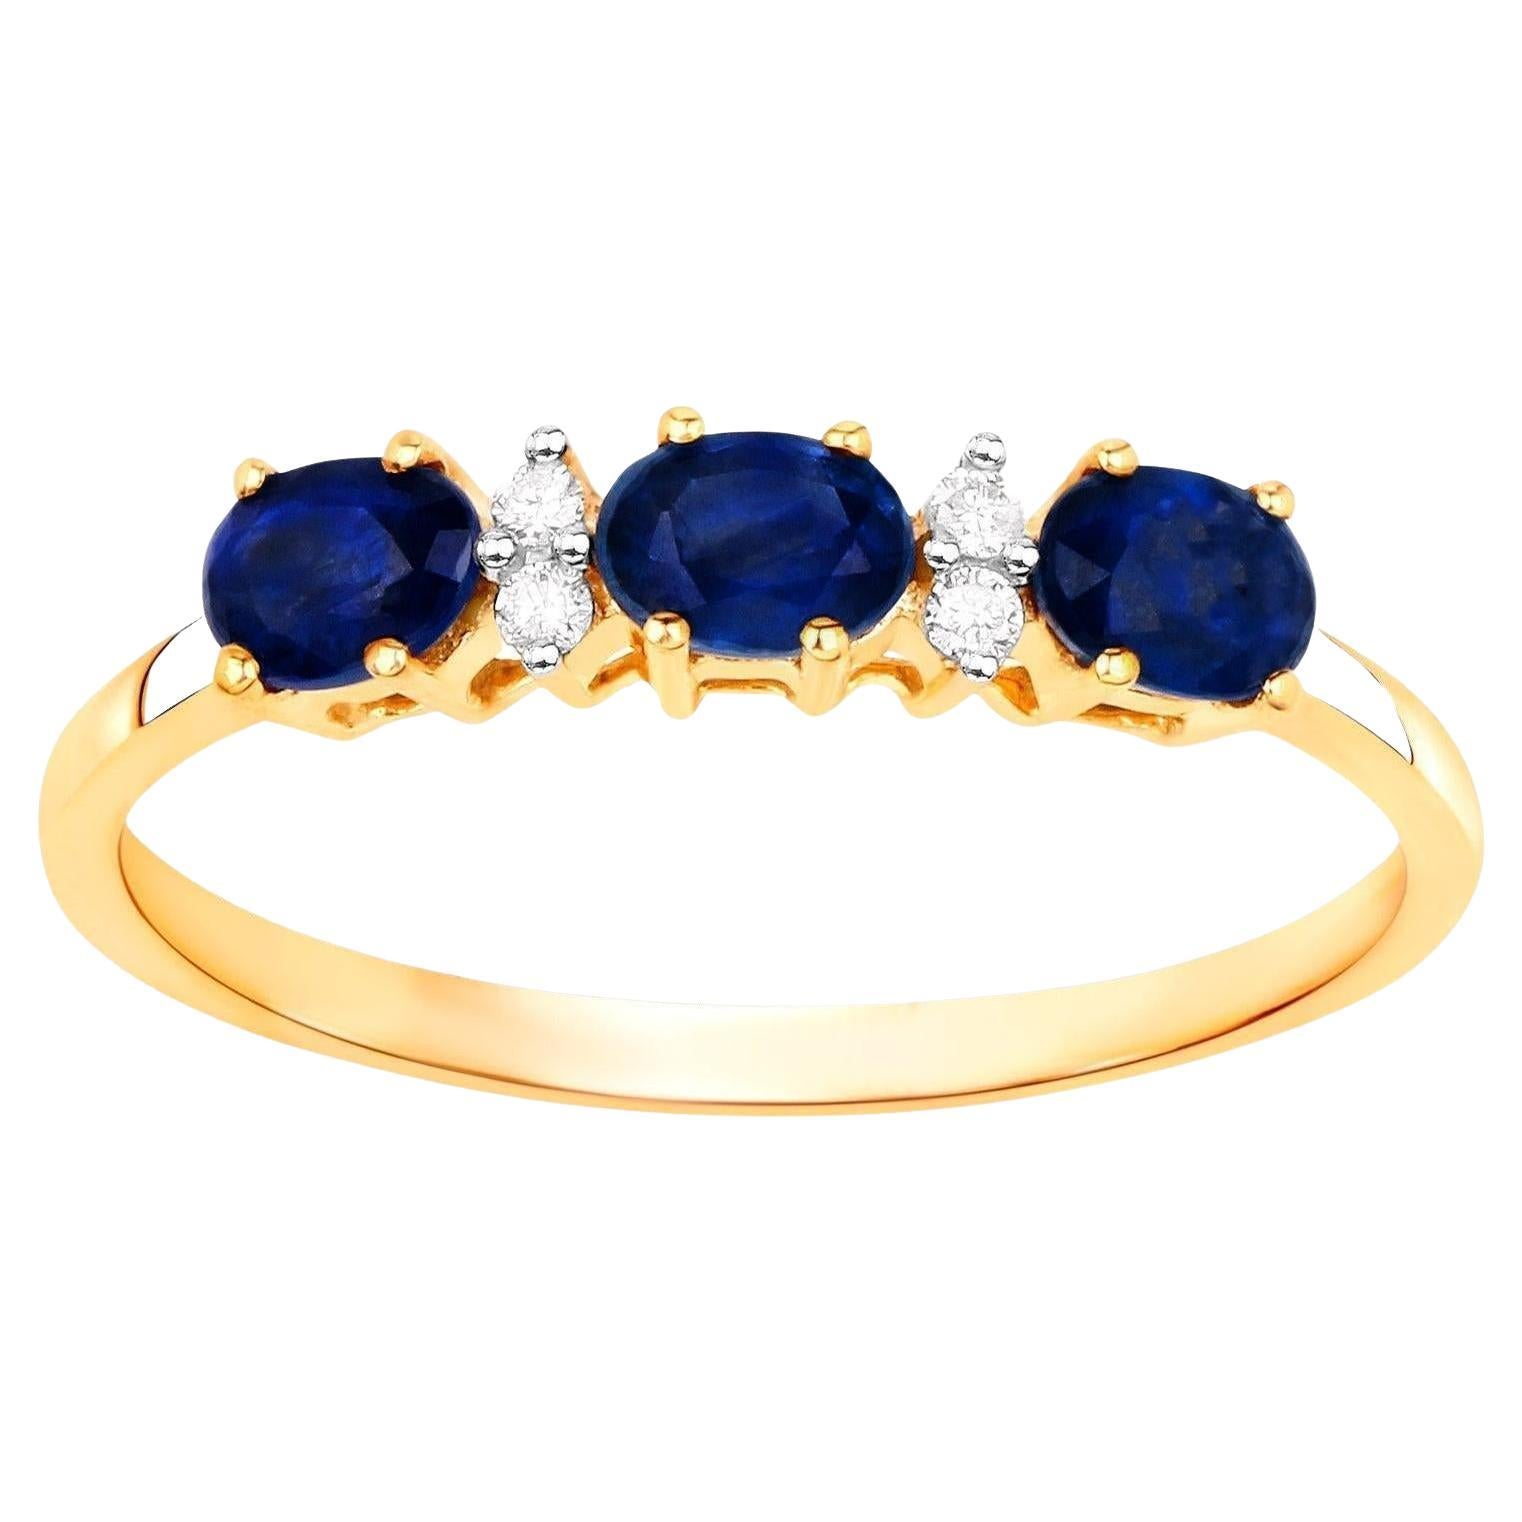 Blue Sapphire Ring With Diamonds 10K Yellow Gold